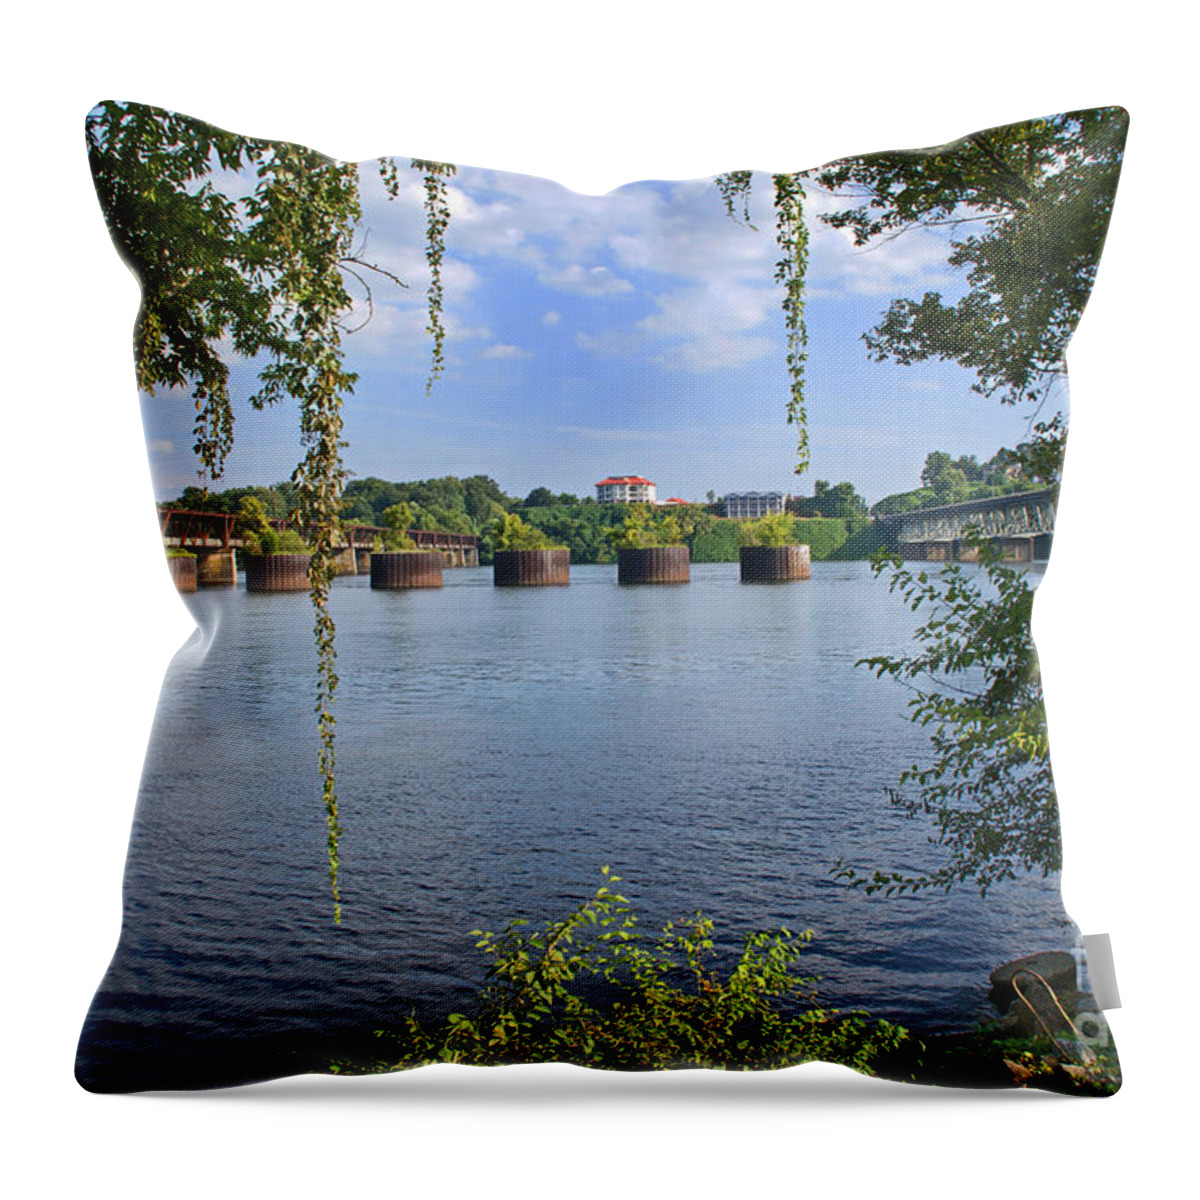 Tennessee River Throw Pillow featuring the photograph Across The Tennessee by Paul Mashburn